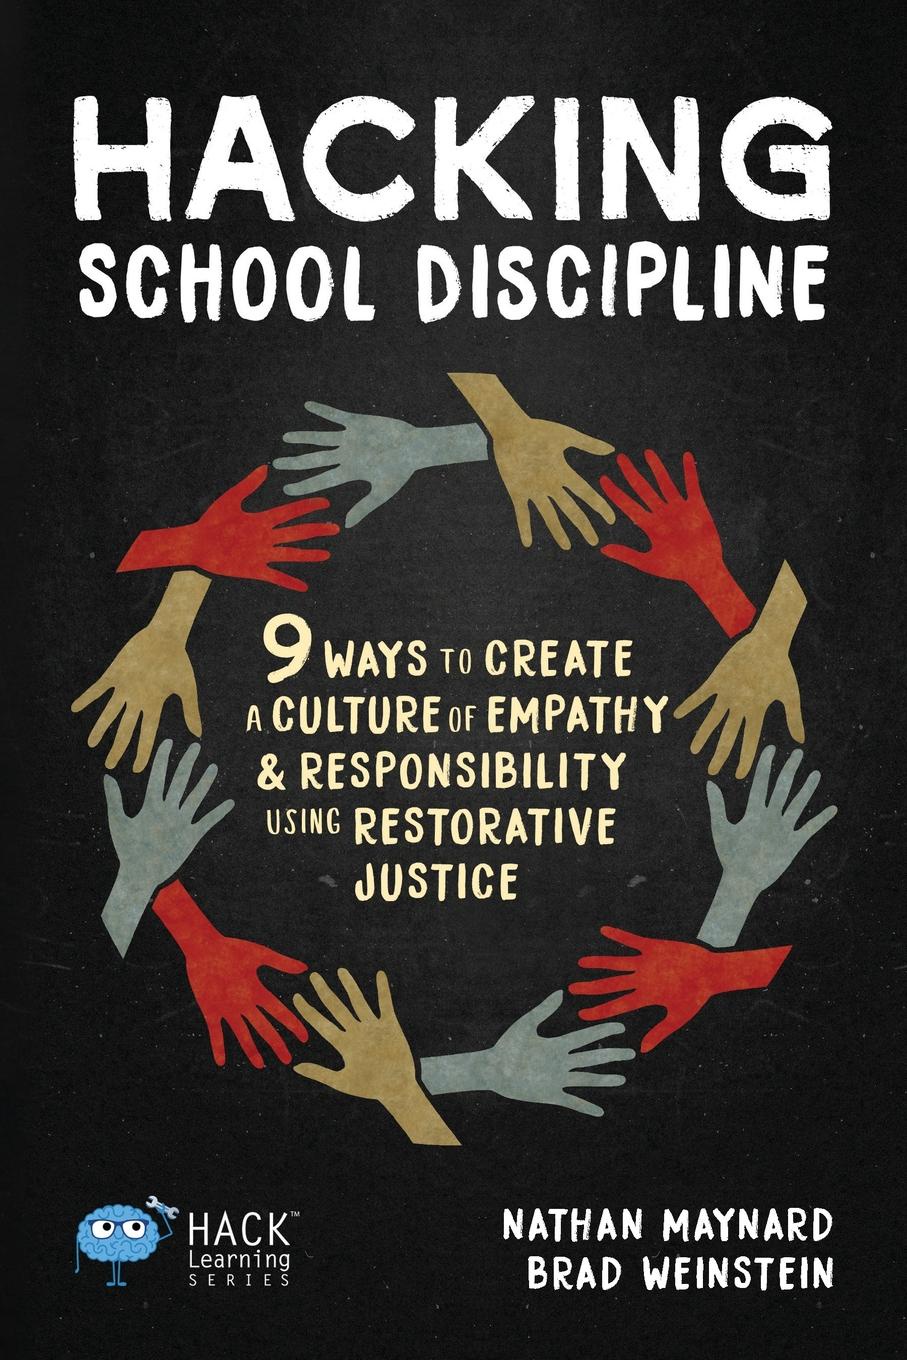 Hacking School Discipline. 9 Ways to Create a Culture of Empathy and Responsibility Using Restorative Justice